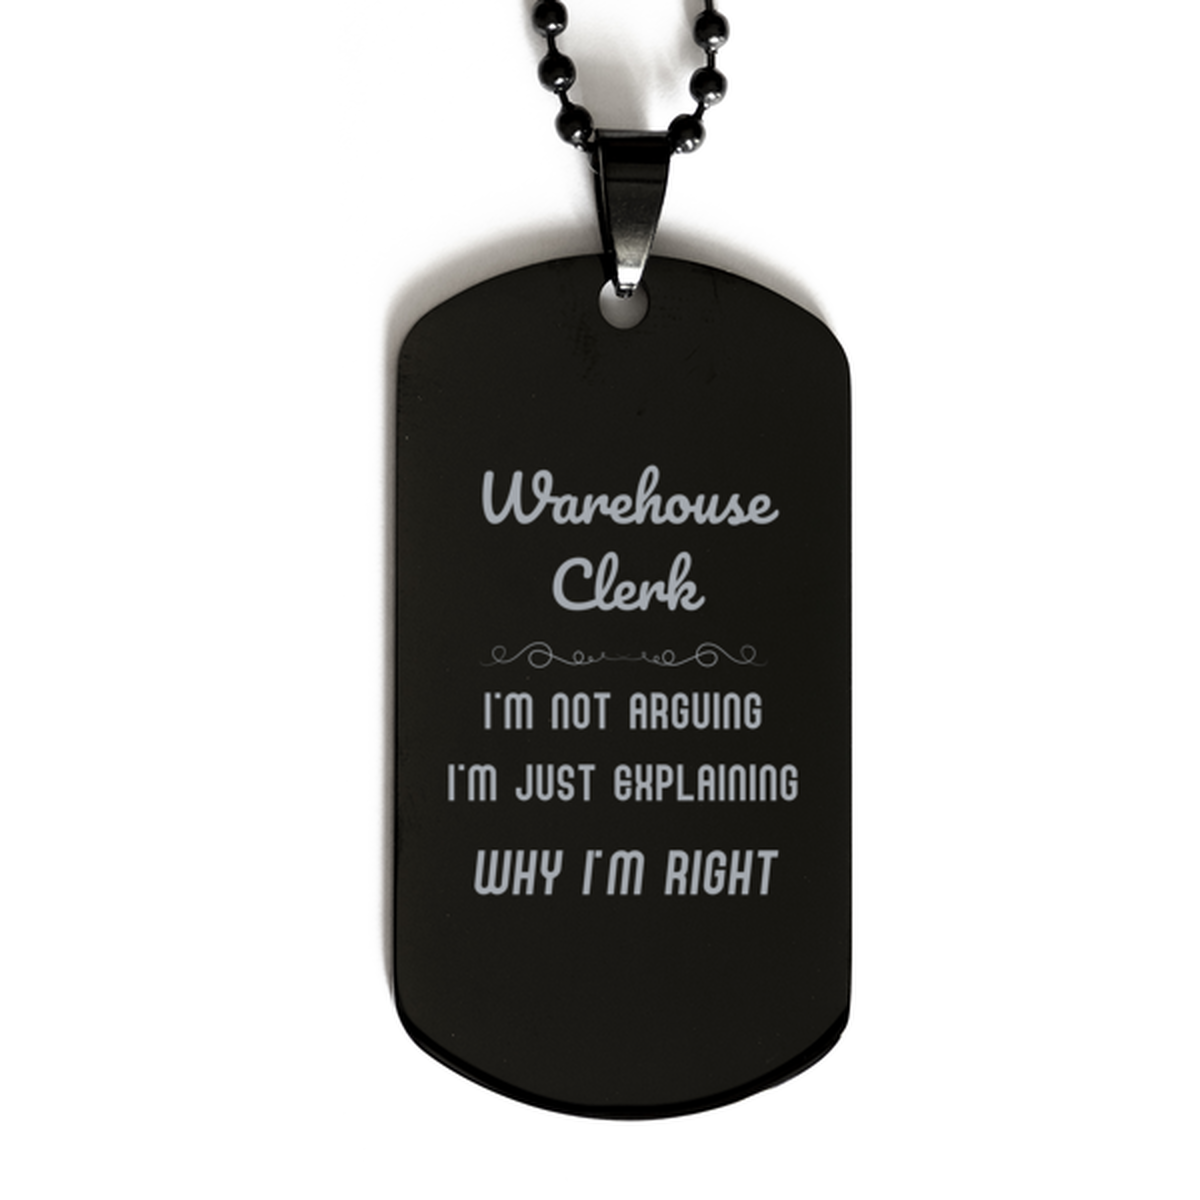 Warehouse Clerk I'm not Arguing. I'm Just Explaining Why I'm RIGHT Black Dog Tag, Funny Saying Quote Warehouse Clerk Gifts For Warehouse Clerk Graduation Birthday Christmas Gifts for Men Women Coworker